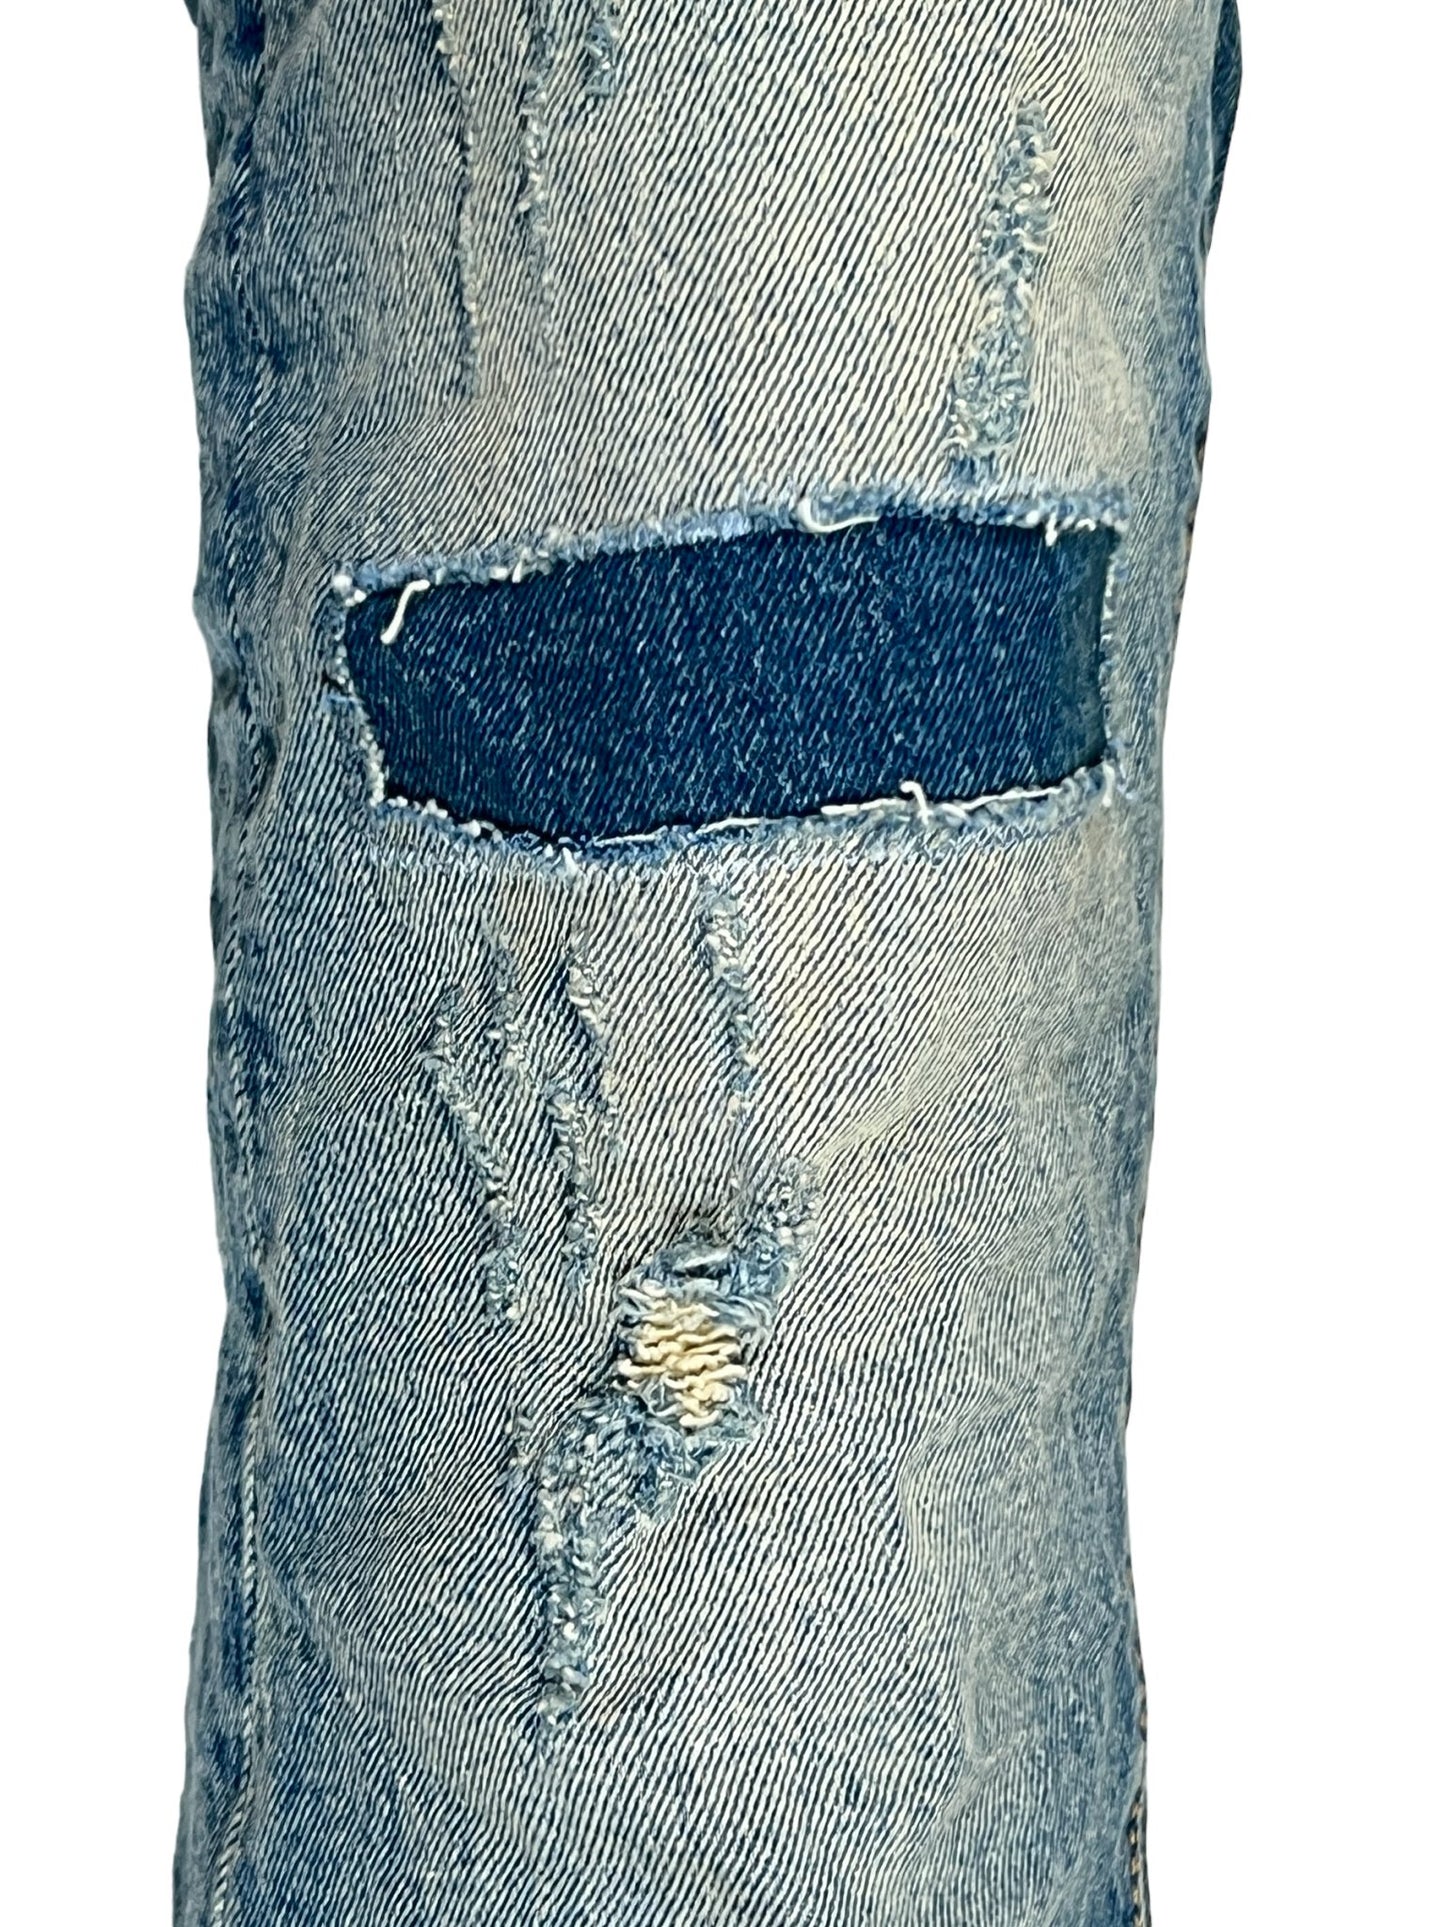 A pair of PURPLE BRAND P004-PRFL PATCH REPAIR FLARE MID INDIGO jeans with holes in them.